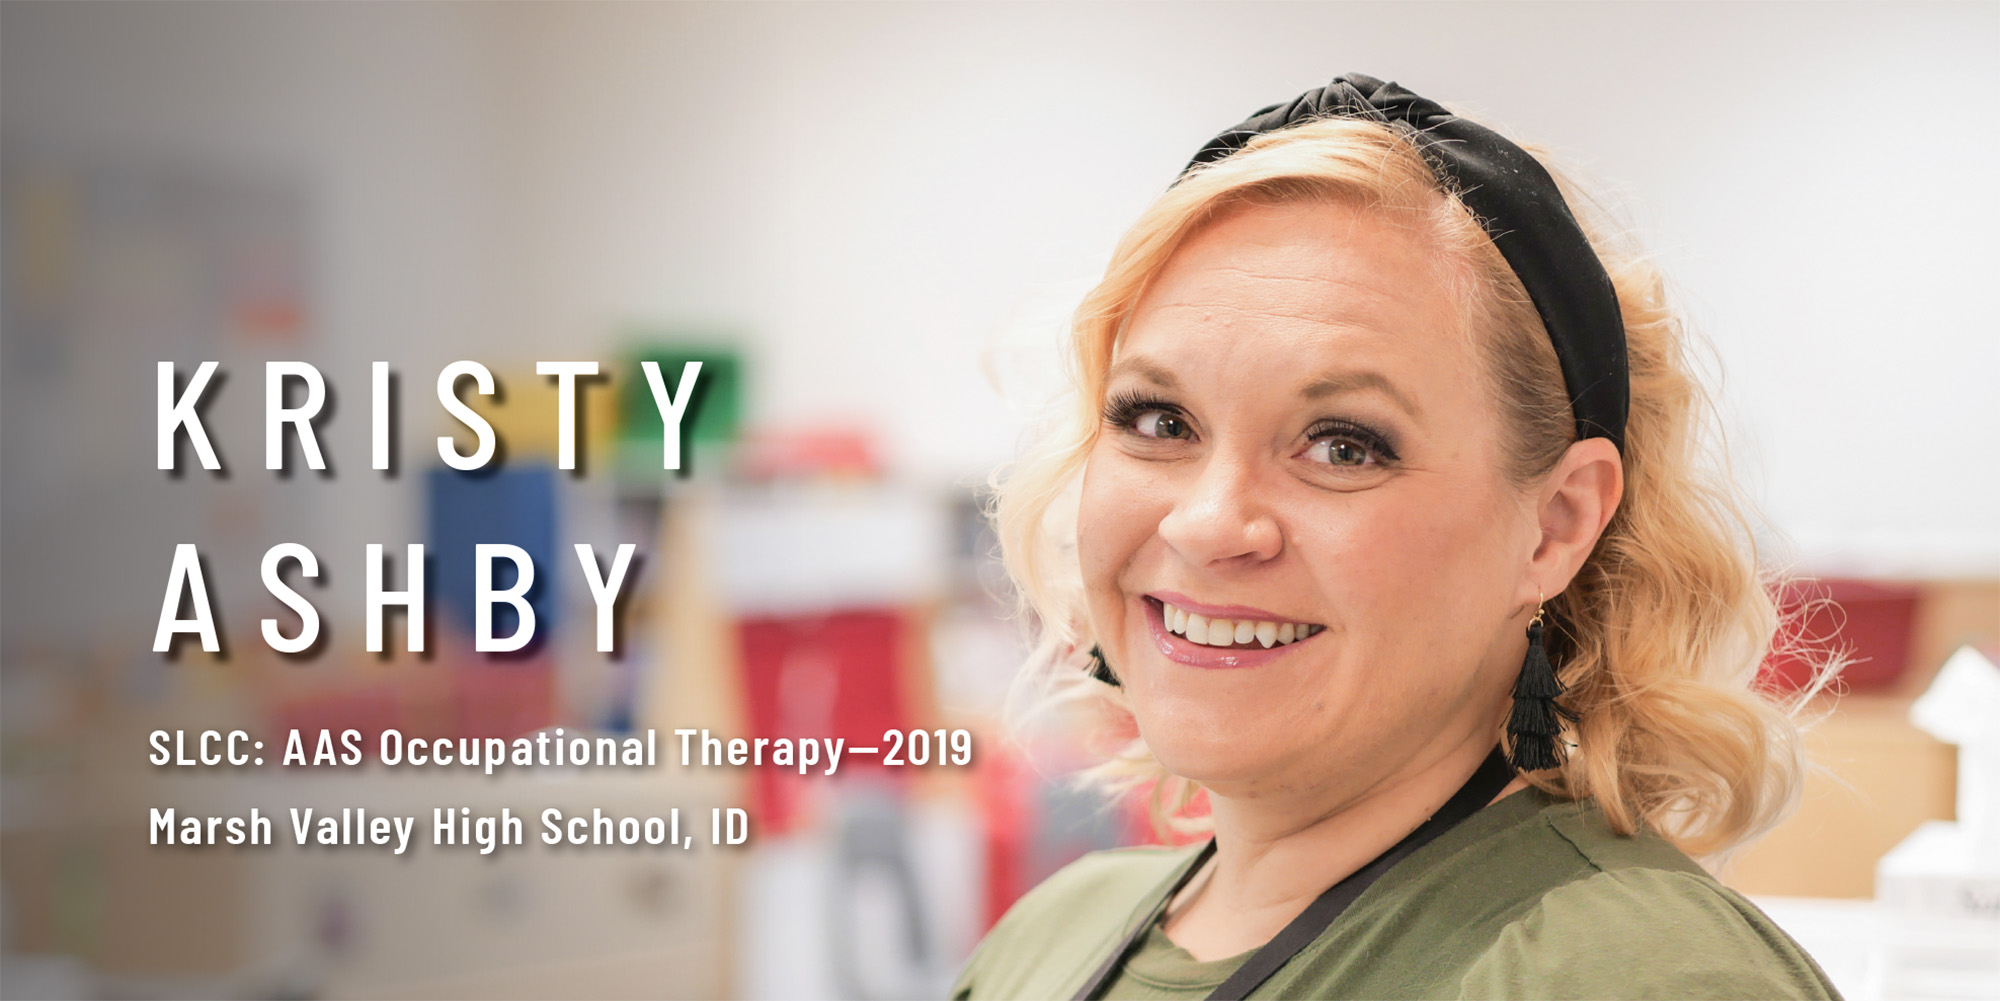 Kristin Ashby, SLCC AAS Occupational Therapy in 2019, From Marsh Valley High School, Idaho